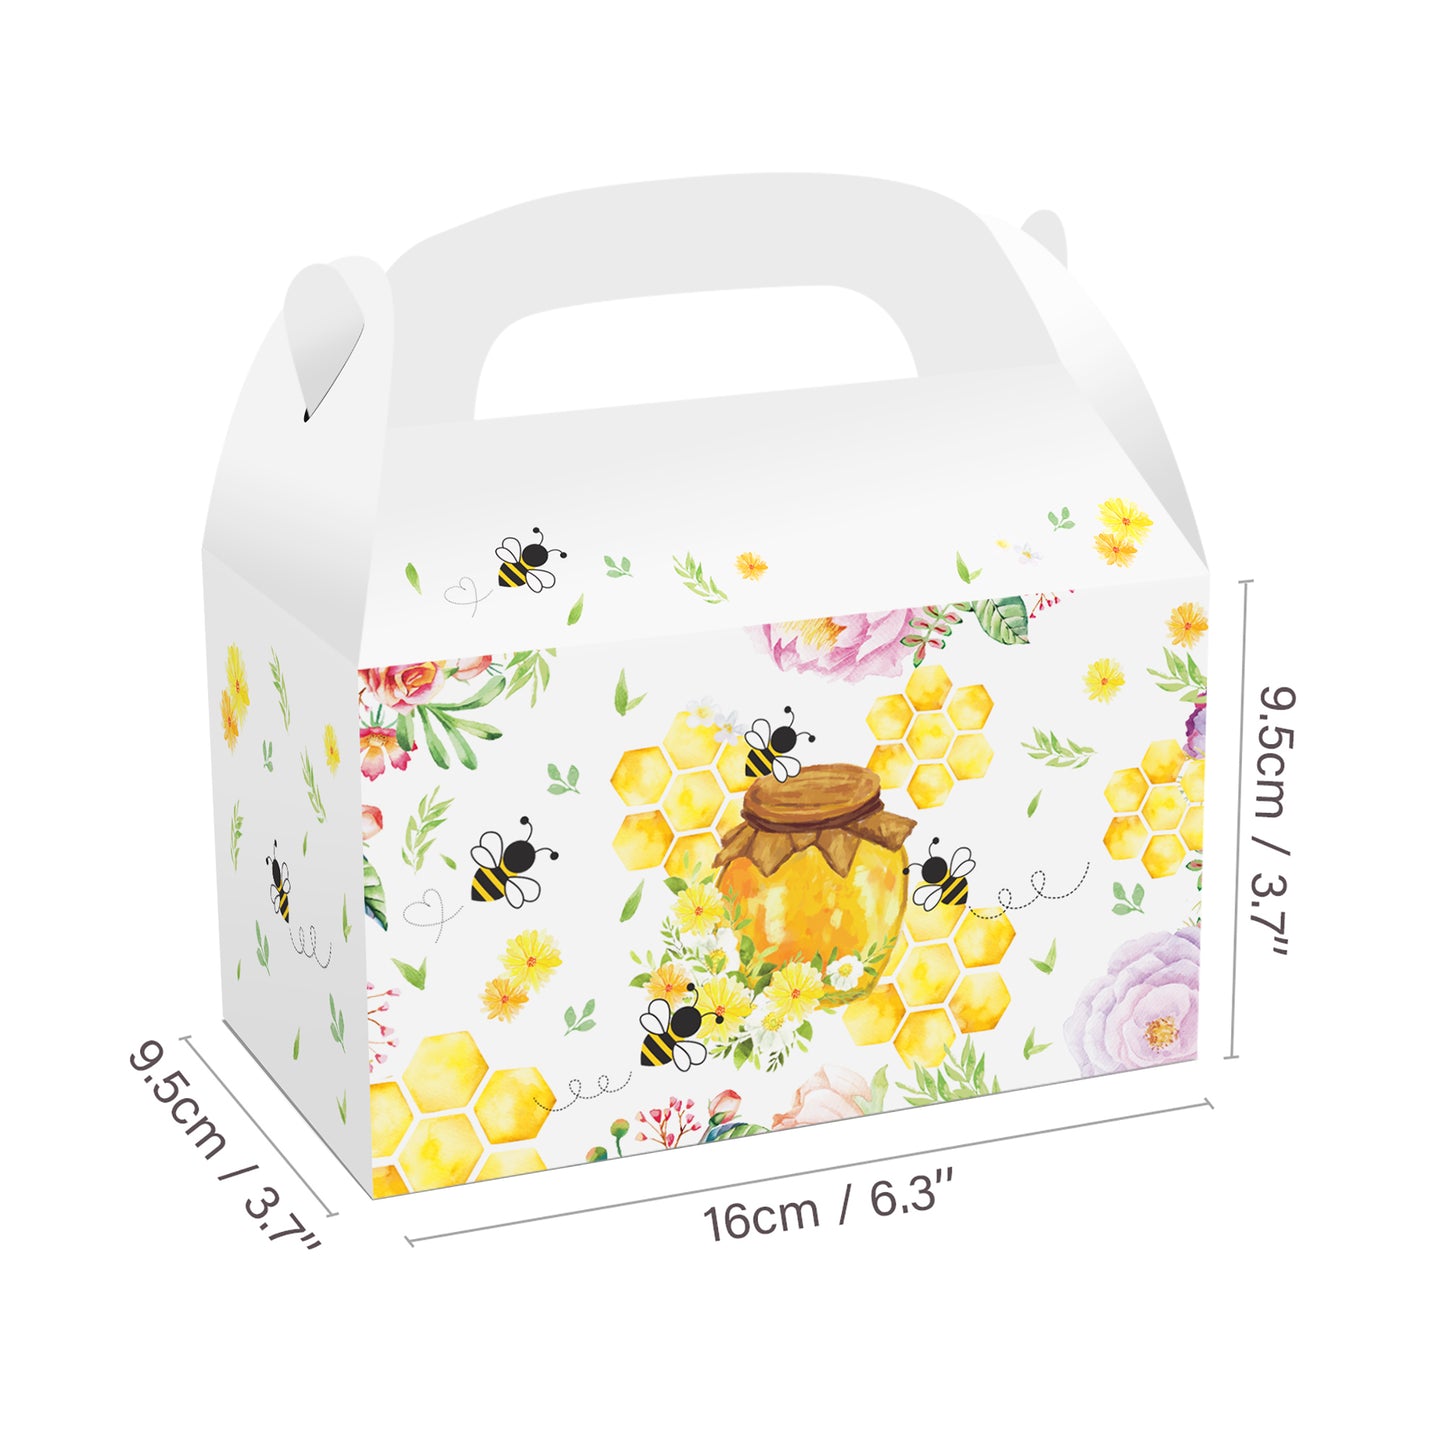 Bumble Bee Paper Boxes, 12-pc